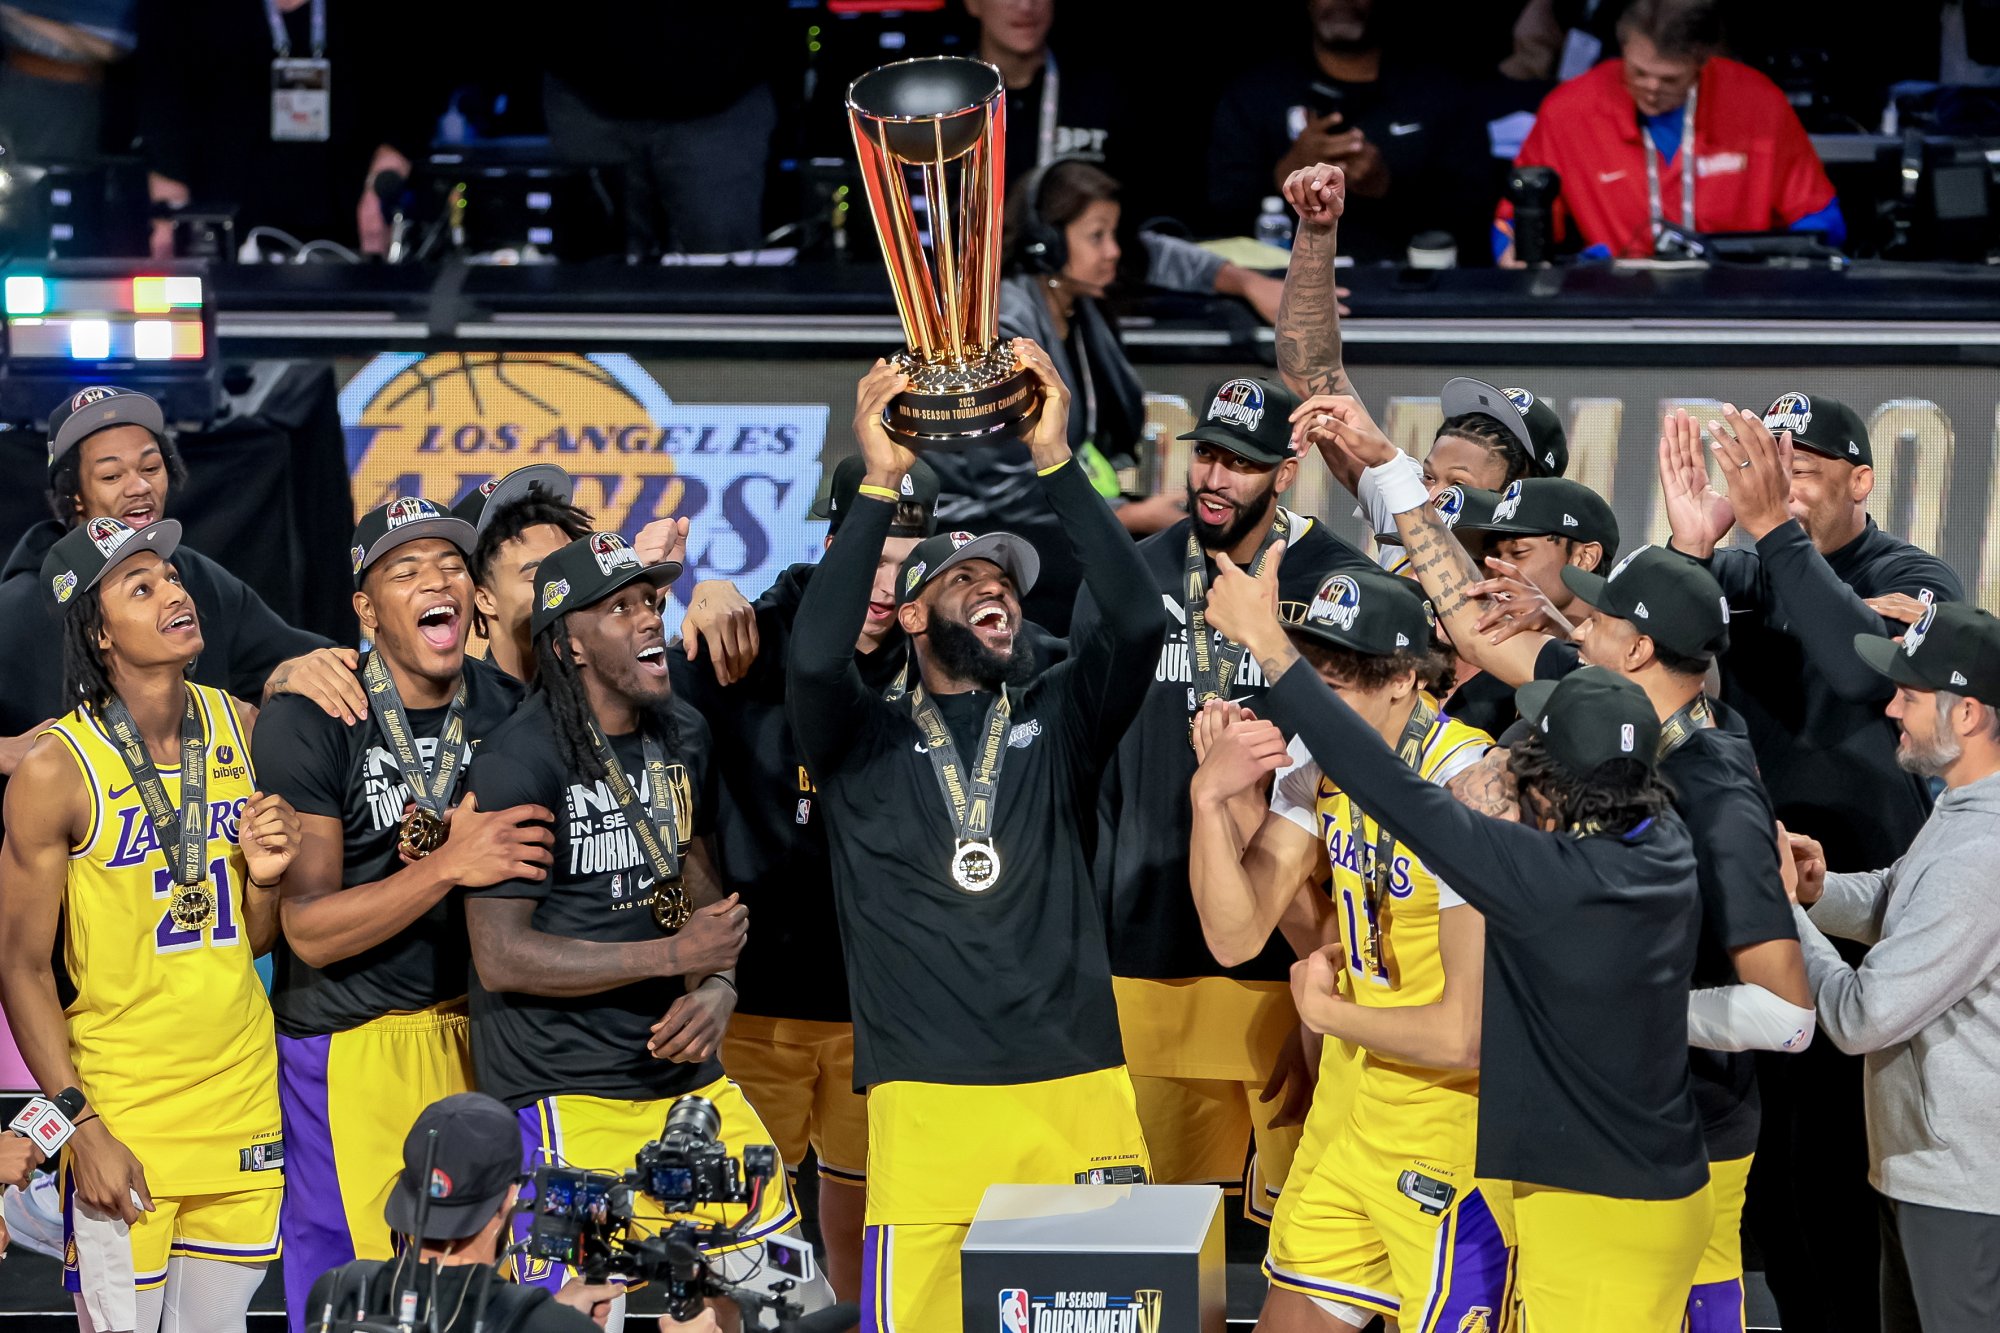 nba cup final: lebron james adds another accolade as los angeles lakers beat indiana pacers to win first in-season tournament